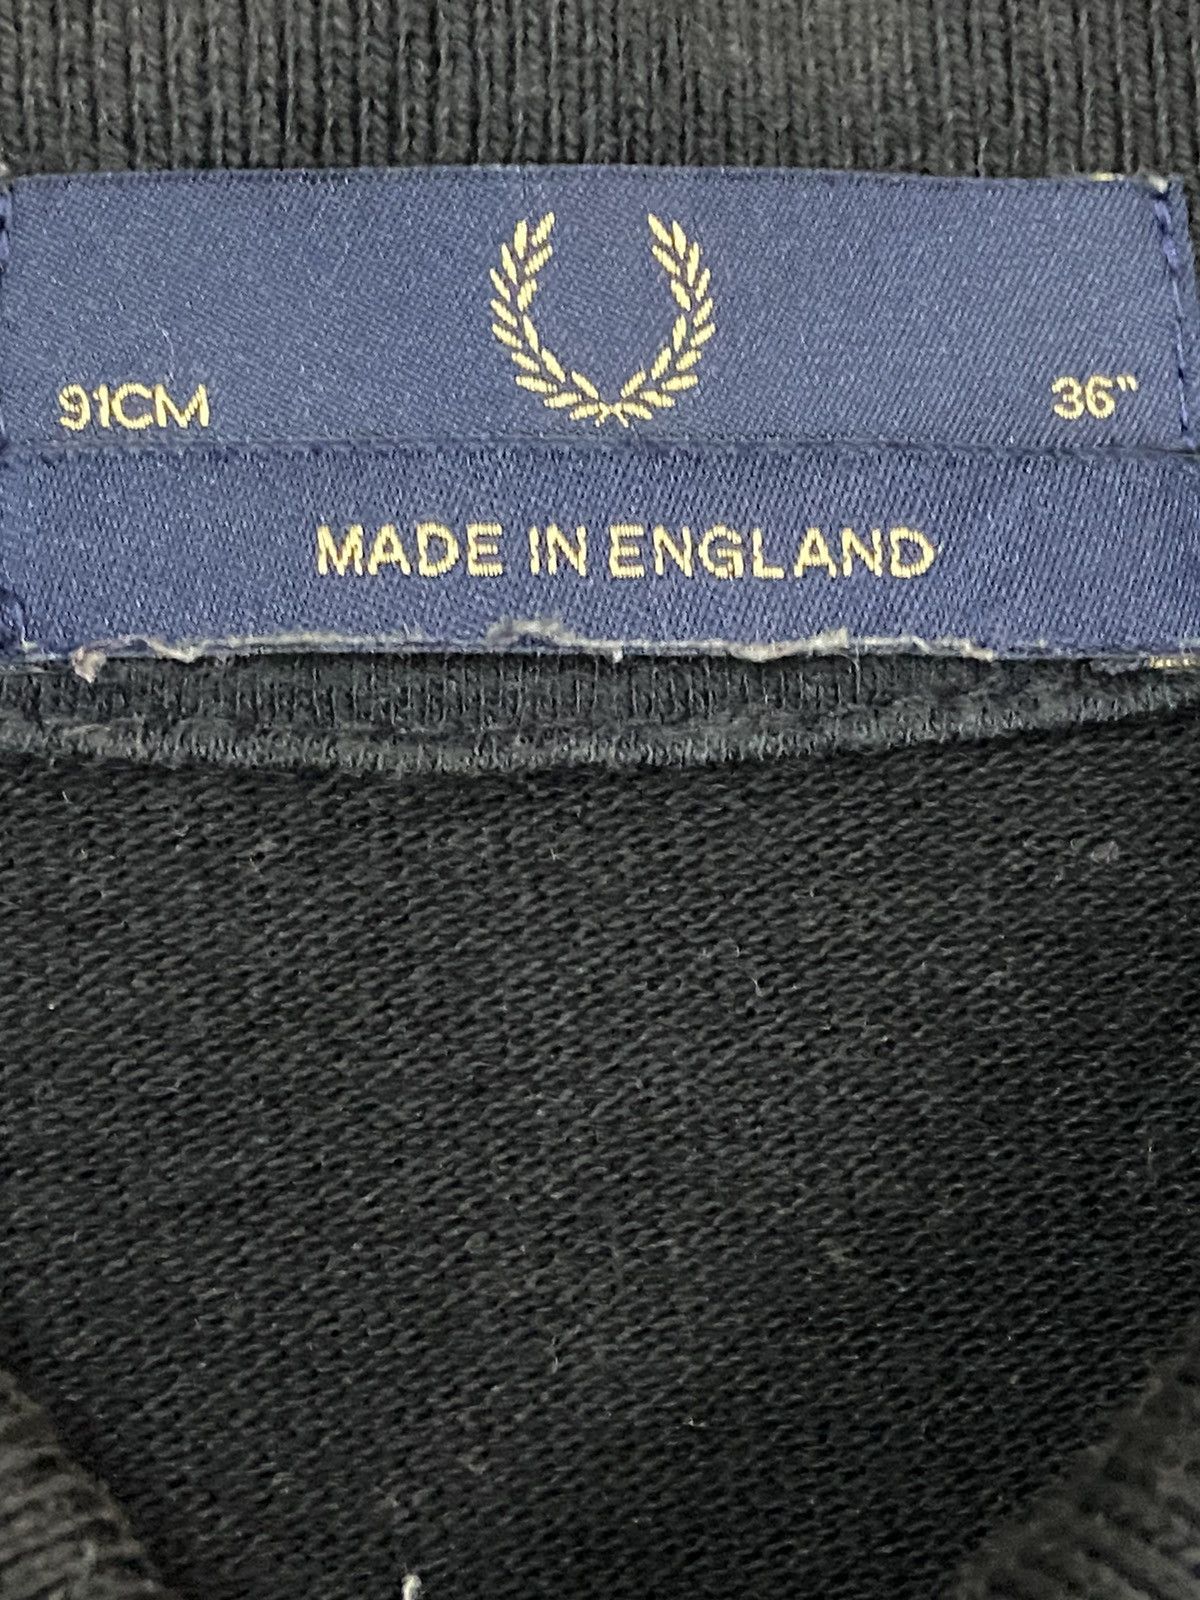 Fred Perry England Polo Shirt - 3